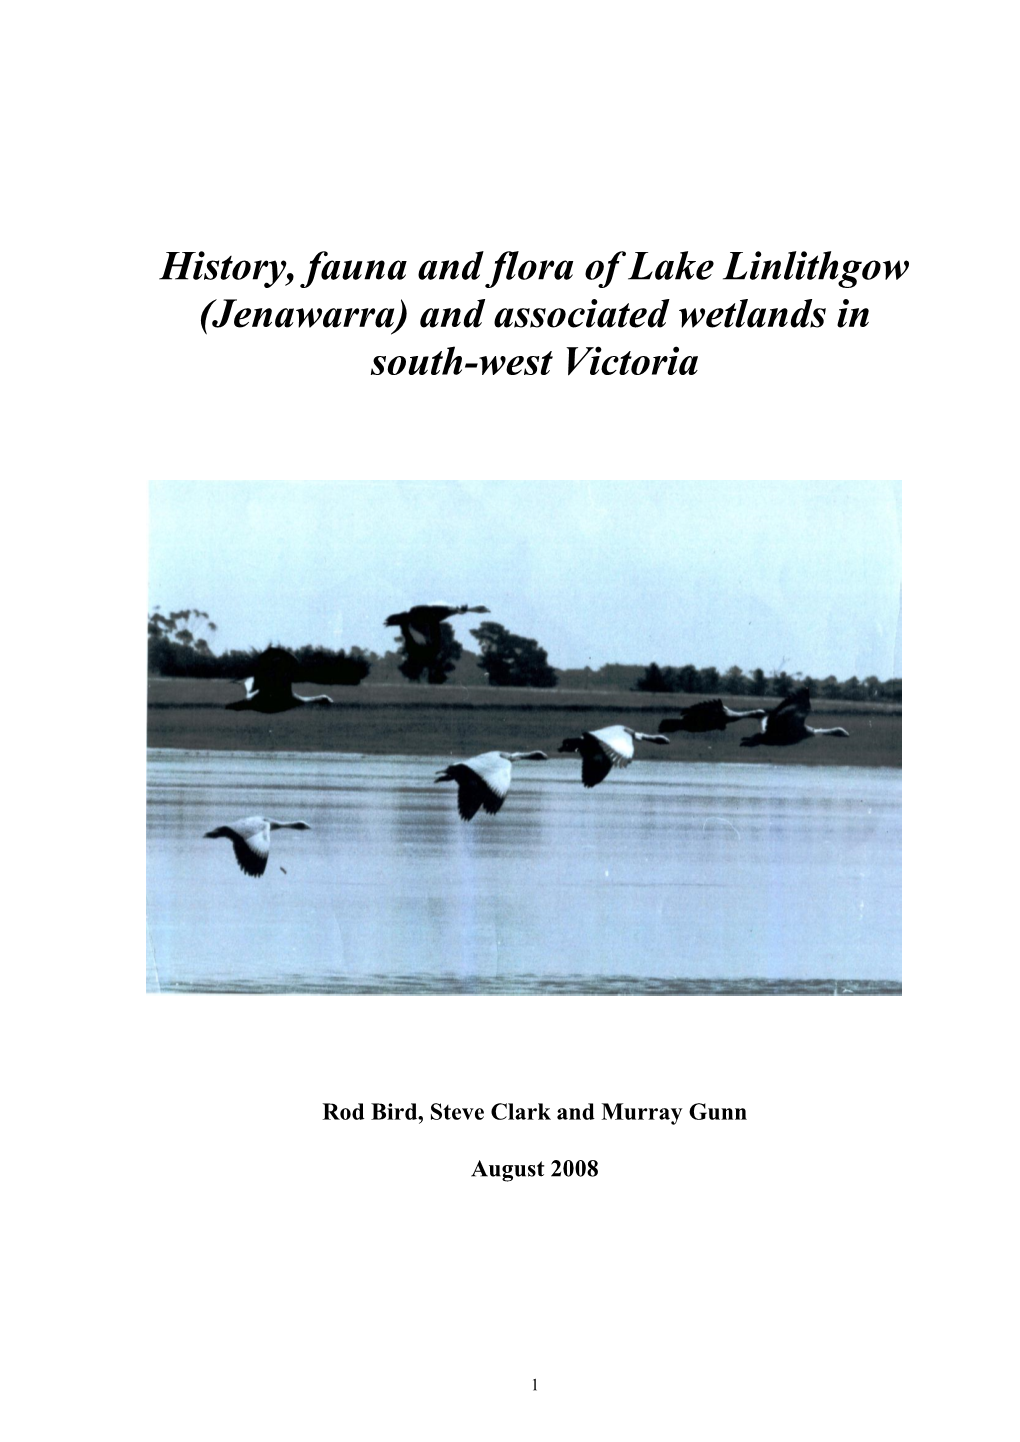 History, Fauna and Flora of Lake Linlithgow (Jenawarra) and Associated Wetlands in South-West Victoria